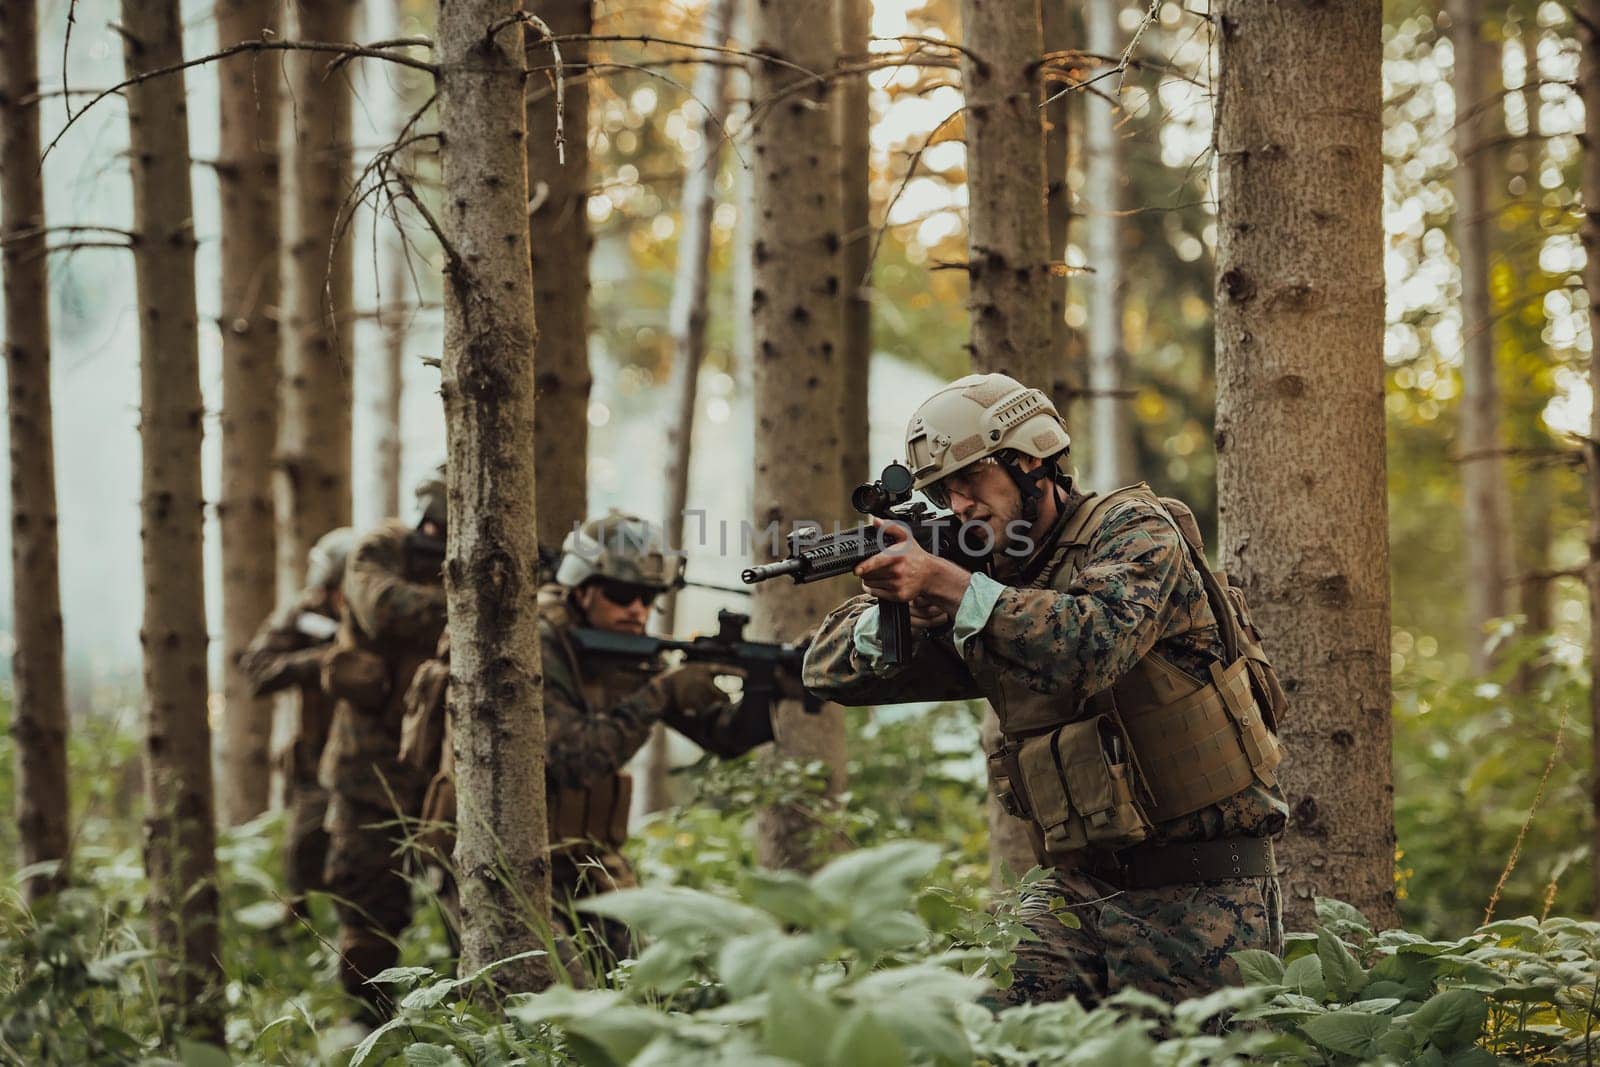 A group of modern warfare soldiers is fighting a war in dangerous remote forest areas. A group of soldiers is fighting on the enemy line with modern weapons. The concept of warfare and military conflicts.